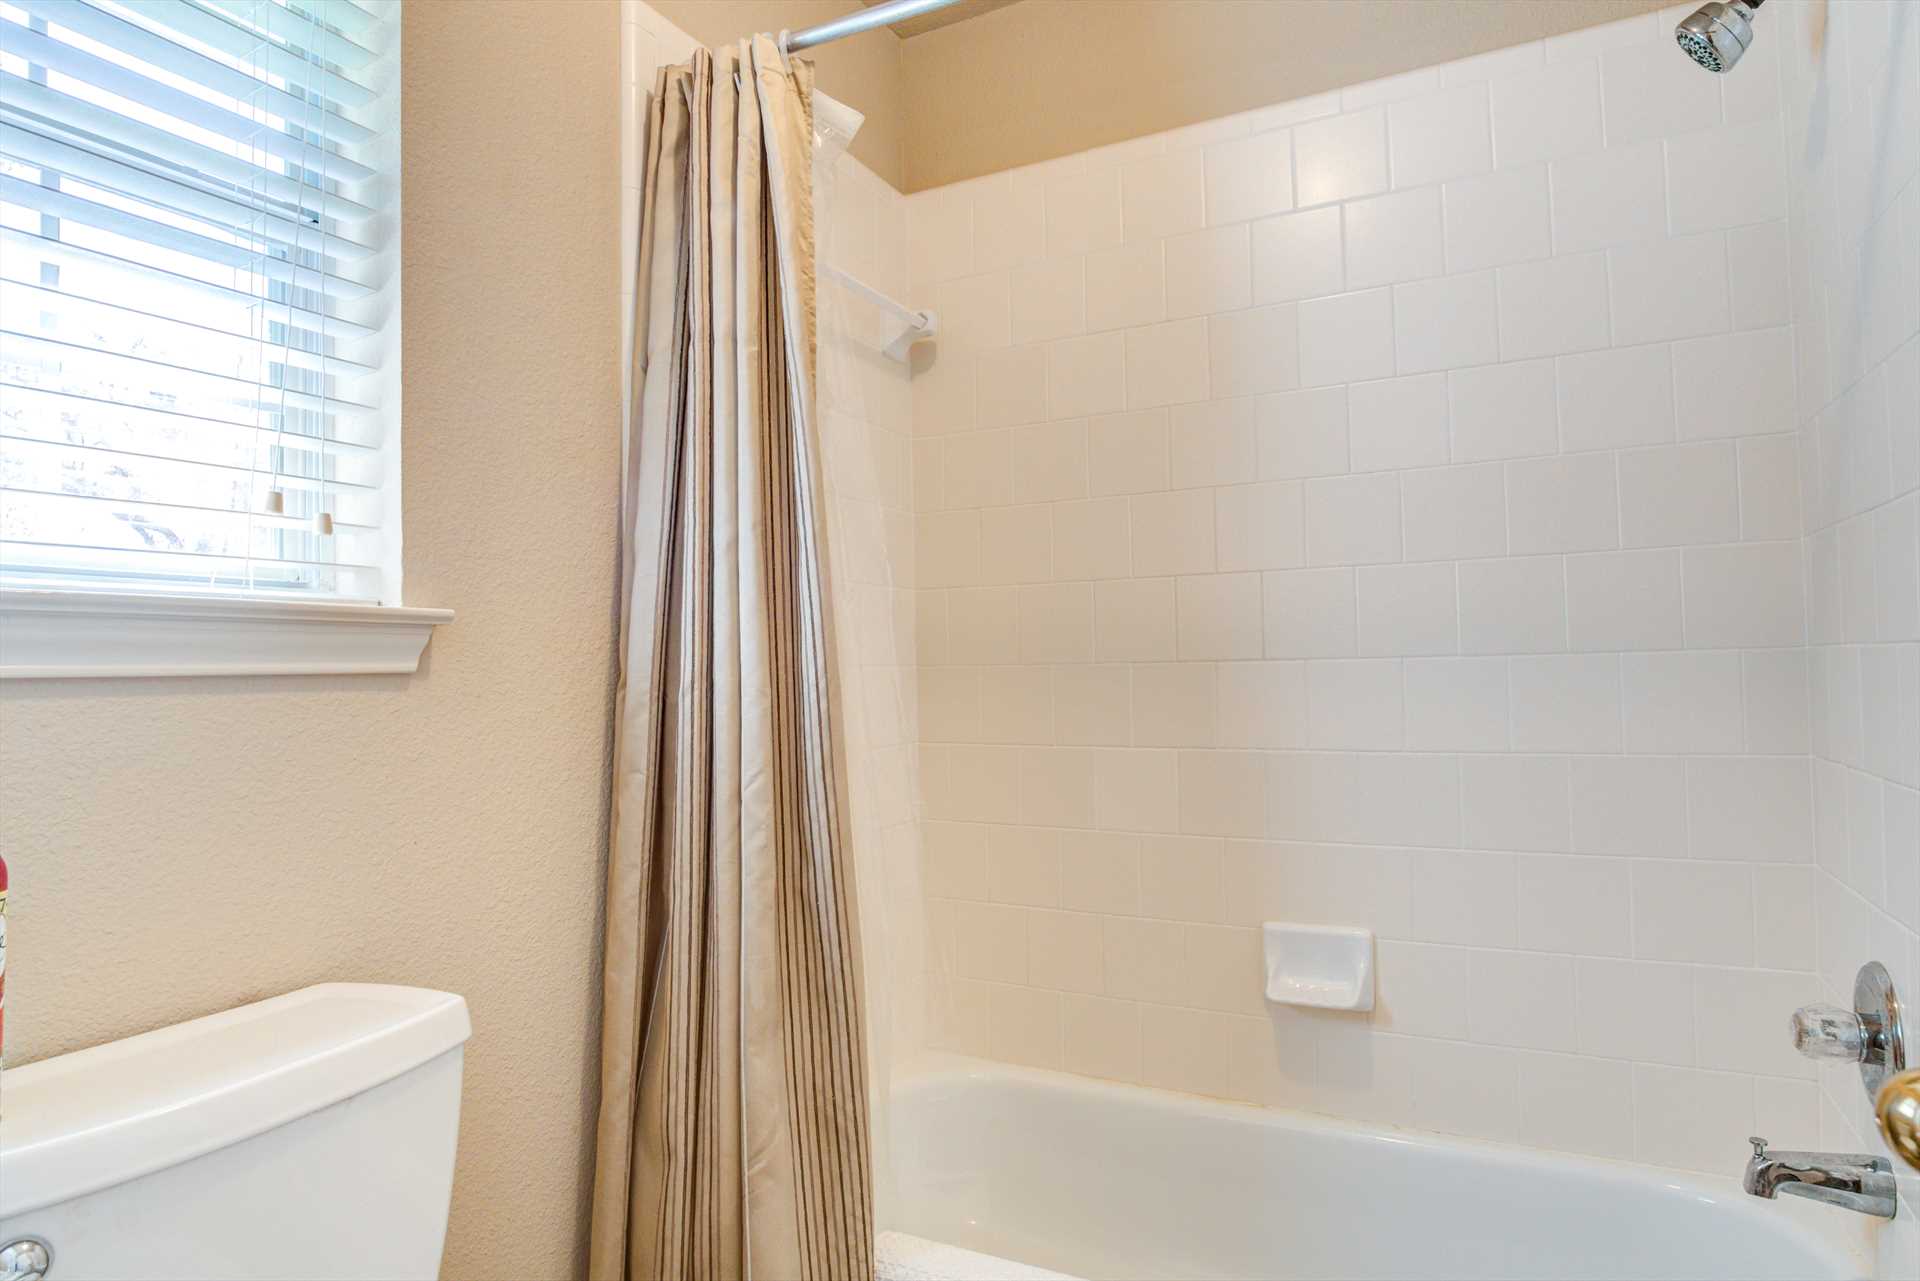                                                 The shared full bath has a tub and shower combo installed, and both bathrooms at the Retreat include fluffy and clean linens.